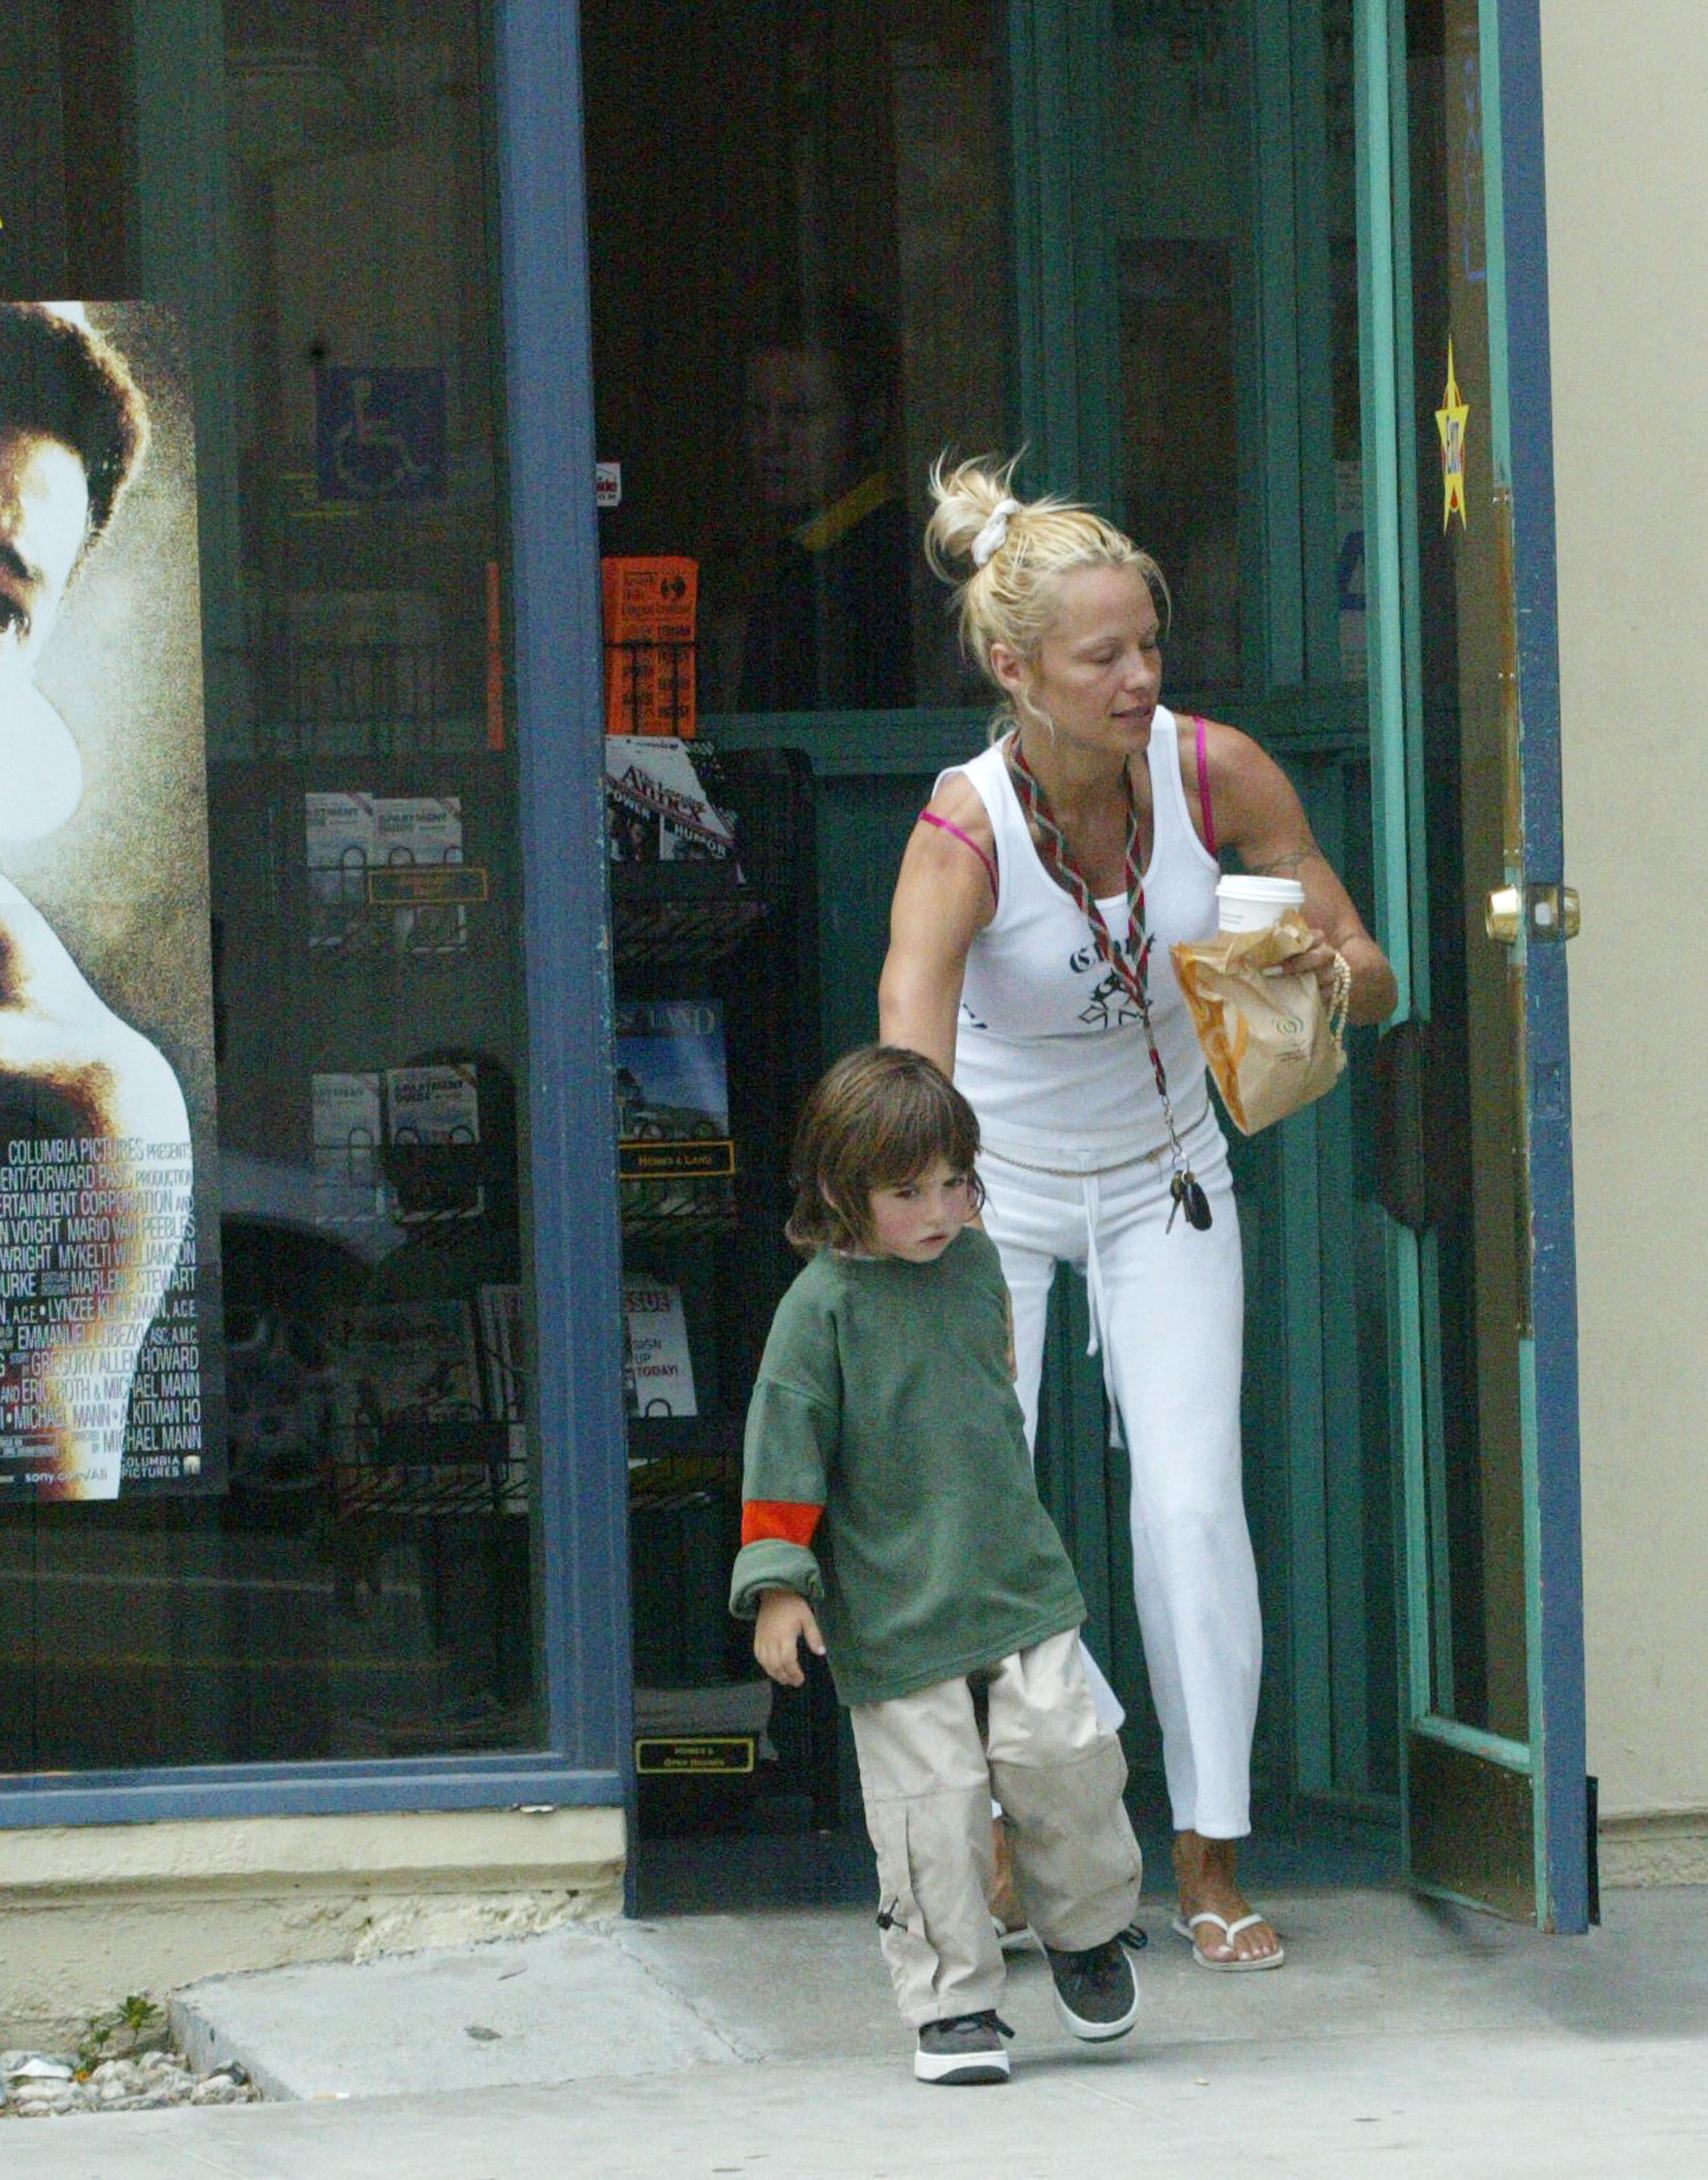 Dylan Lee and Pamela Anderson pictured leaving Blockbuster Video in Santa Monica, California on May 16, 2002 | Source: Getty Images